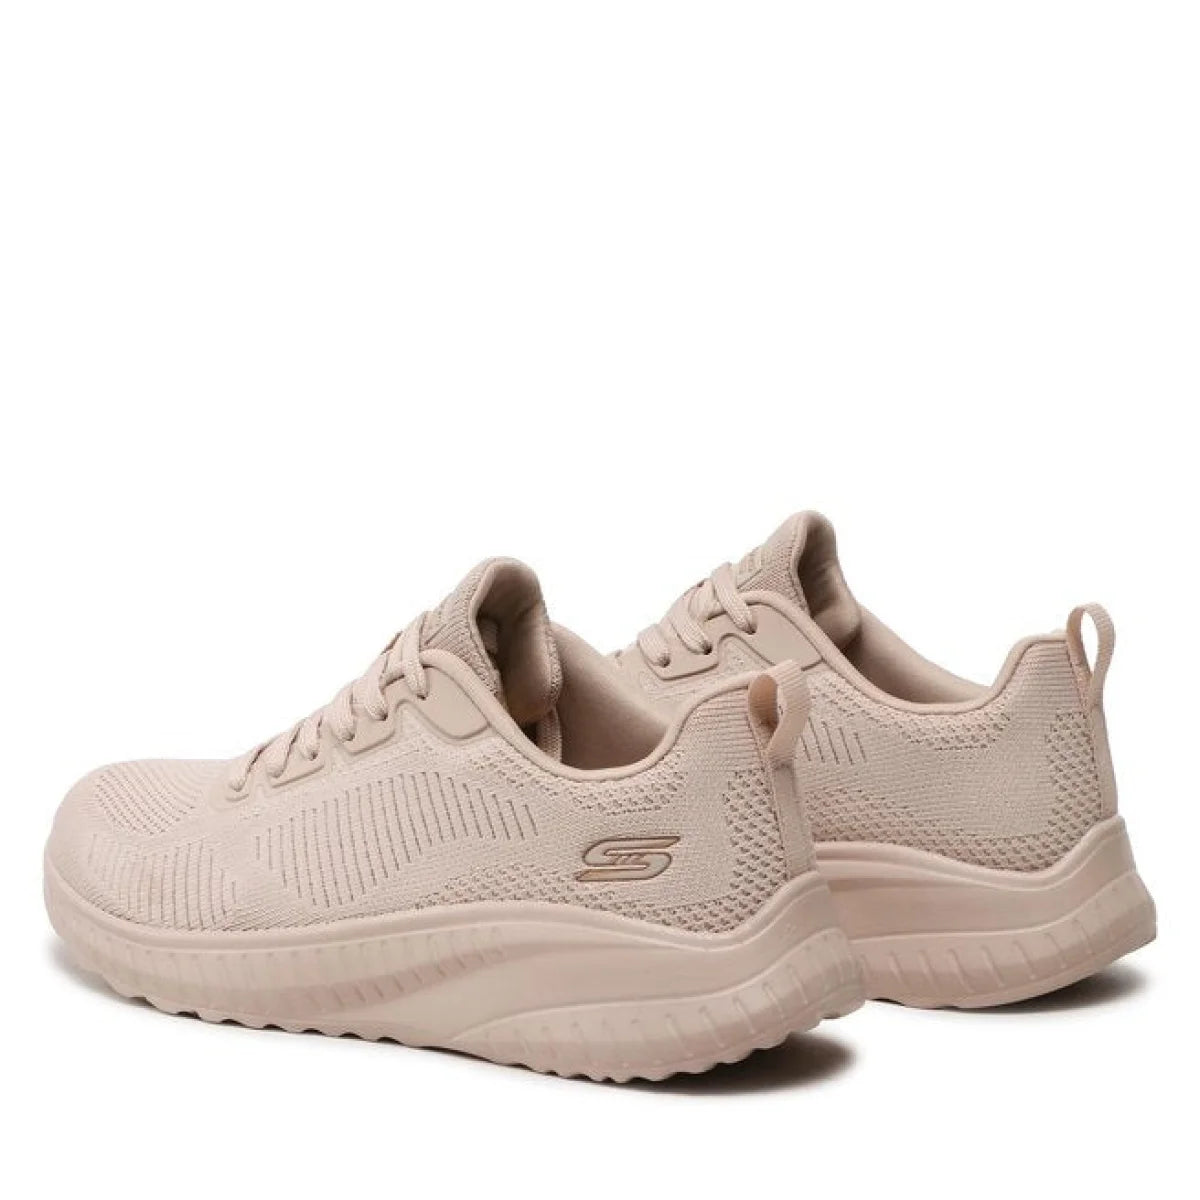 SKECHERS Patike BOBS SQUAD CHAOS - 117209-NUDE